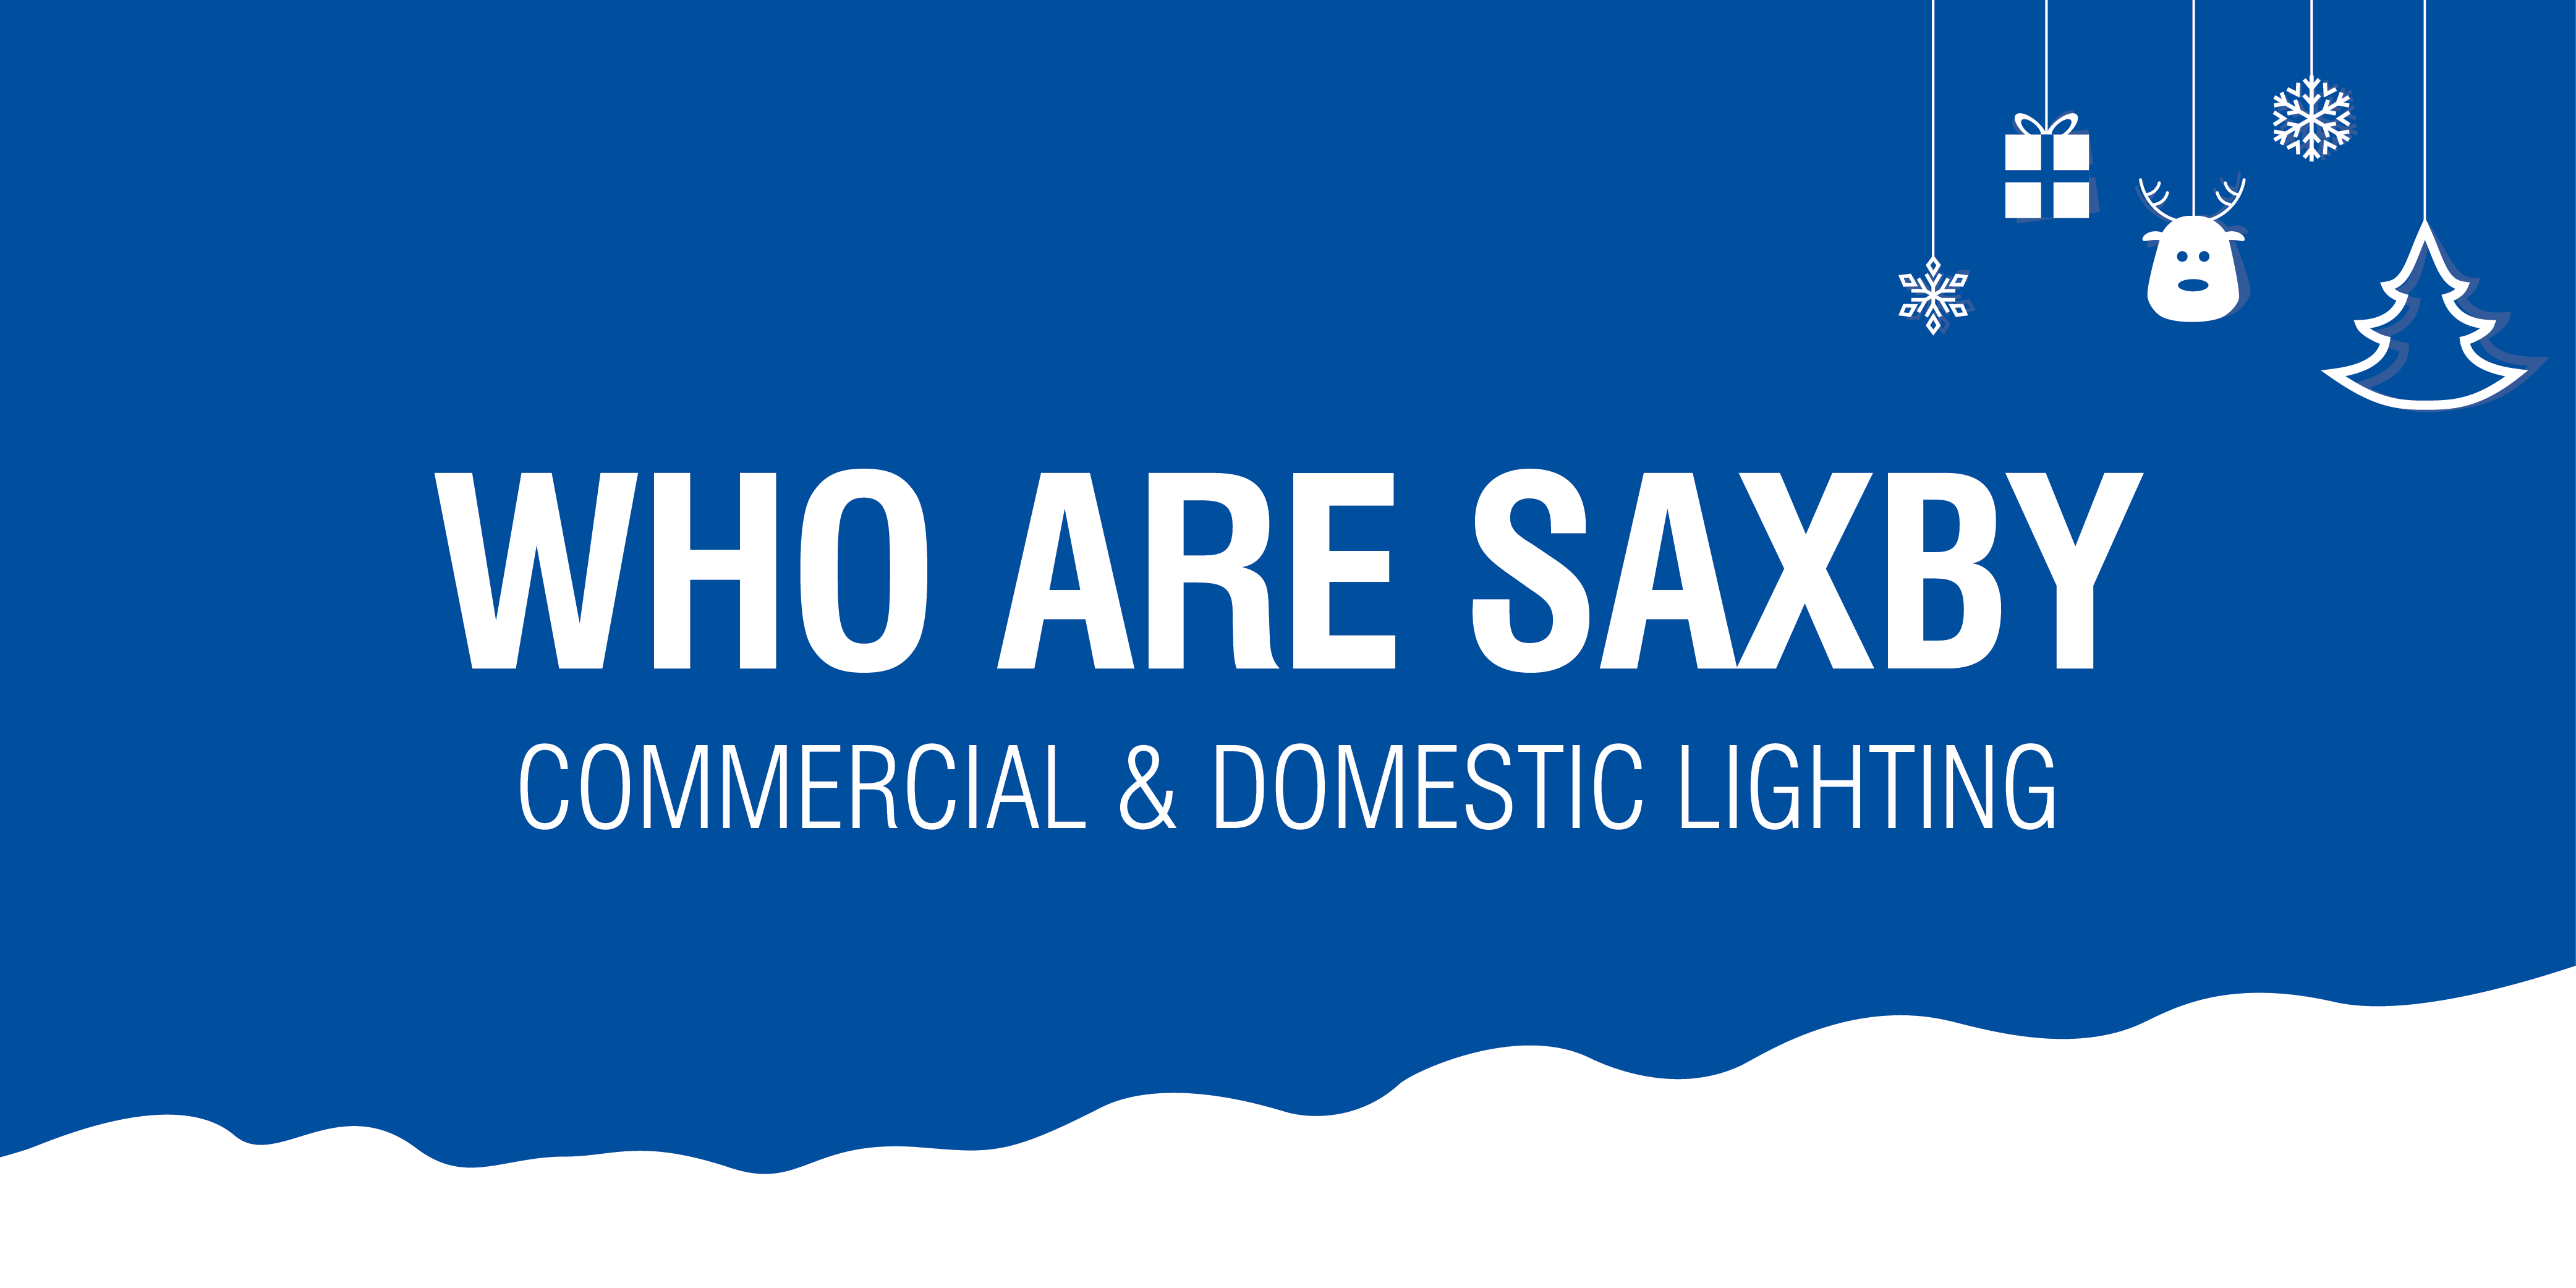 Who Are Saxby? Commercial & Domestic Lighting